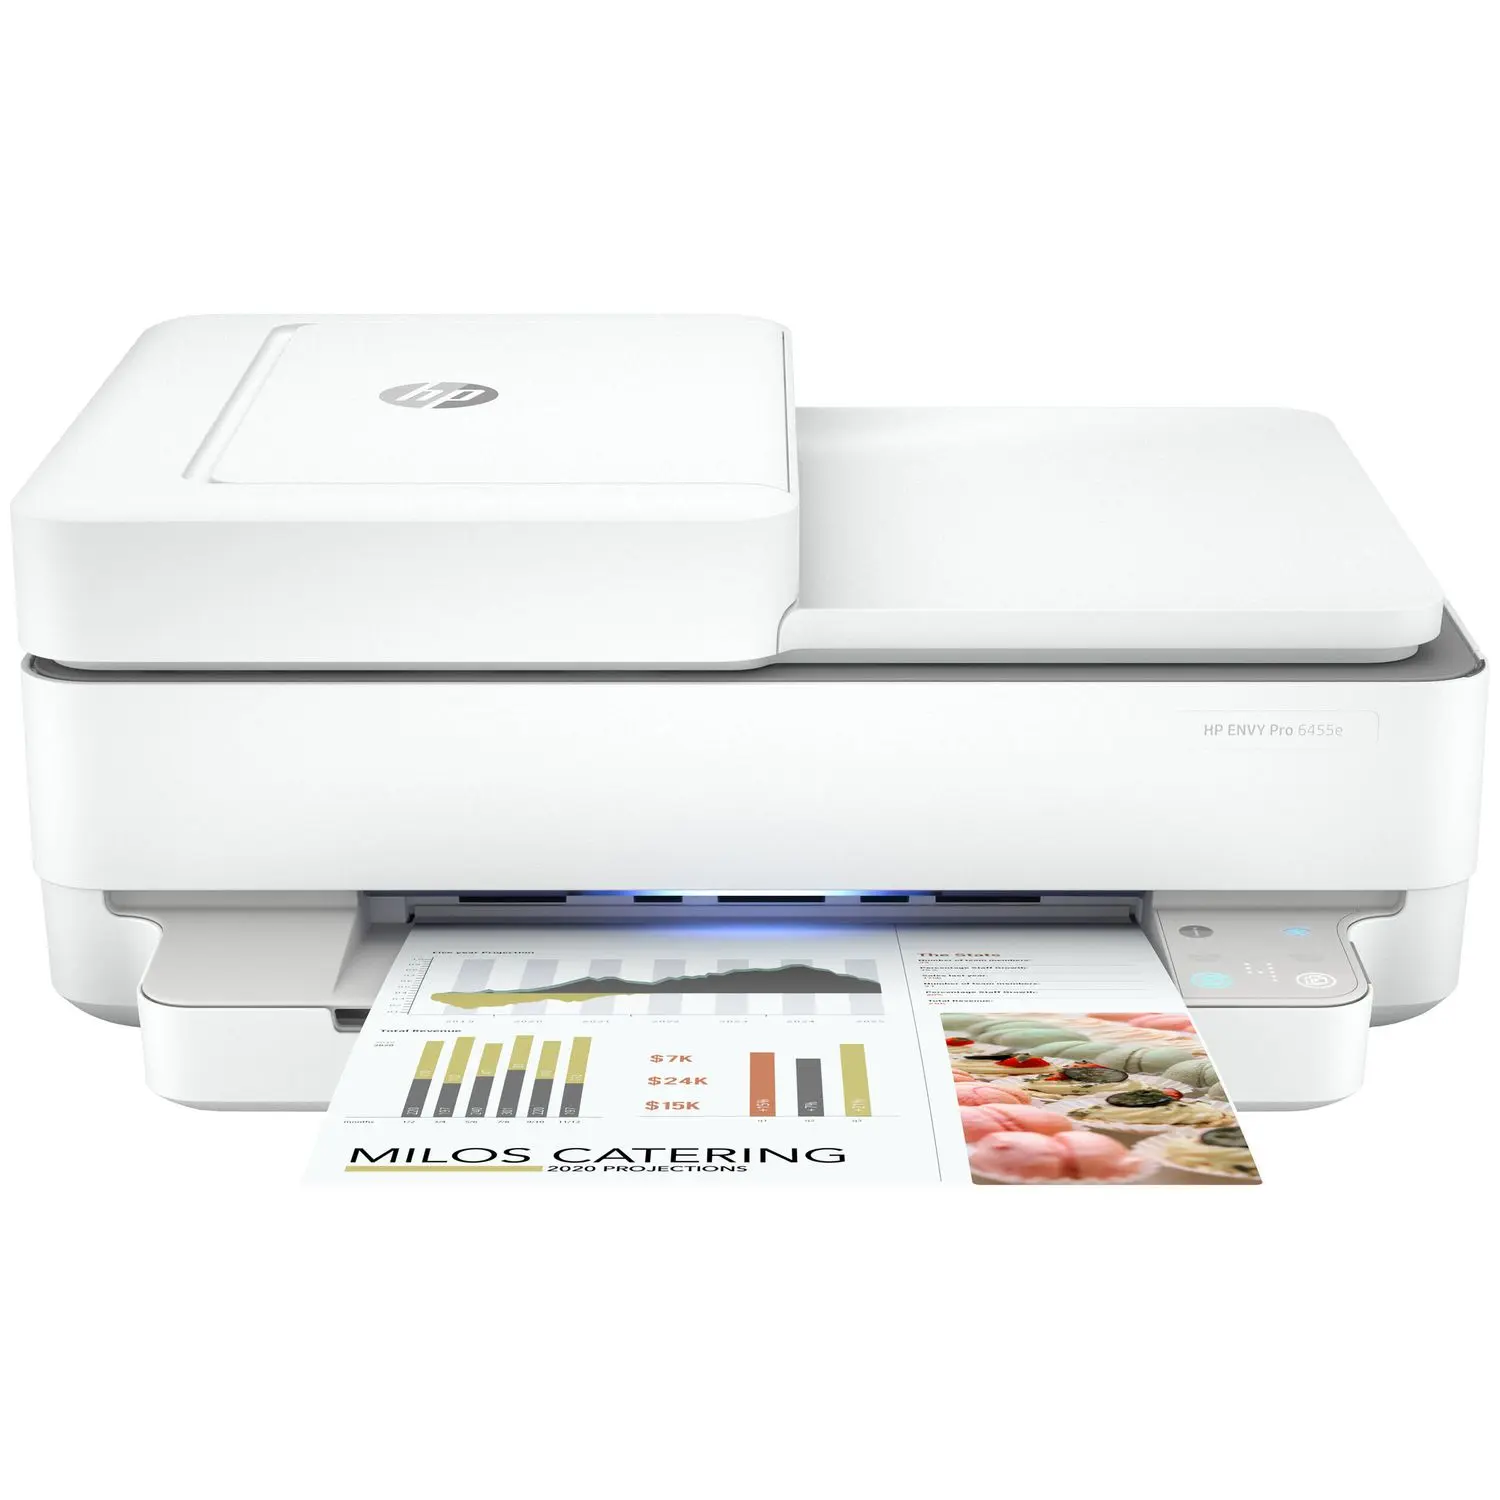 hewlett-packard officejet 6400 all-in-one printer - What type of printer is HP 6400